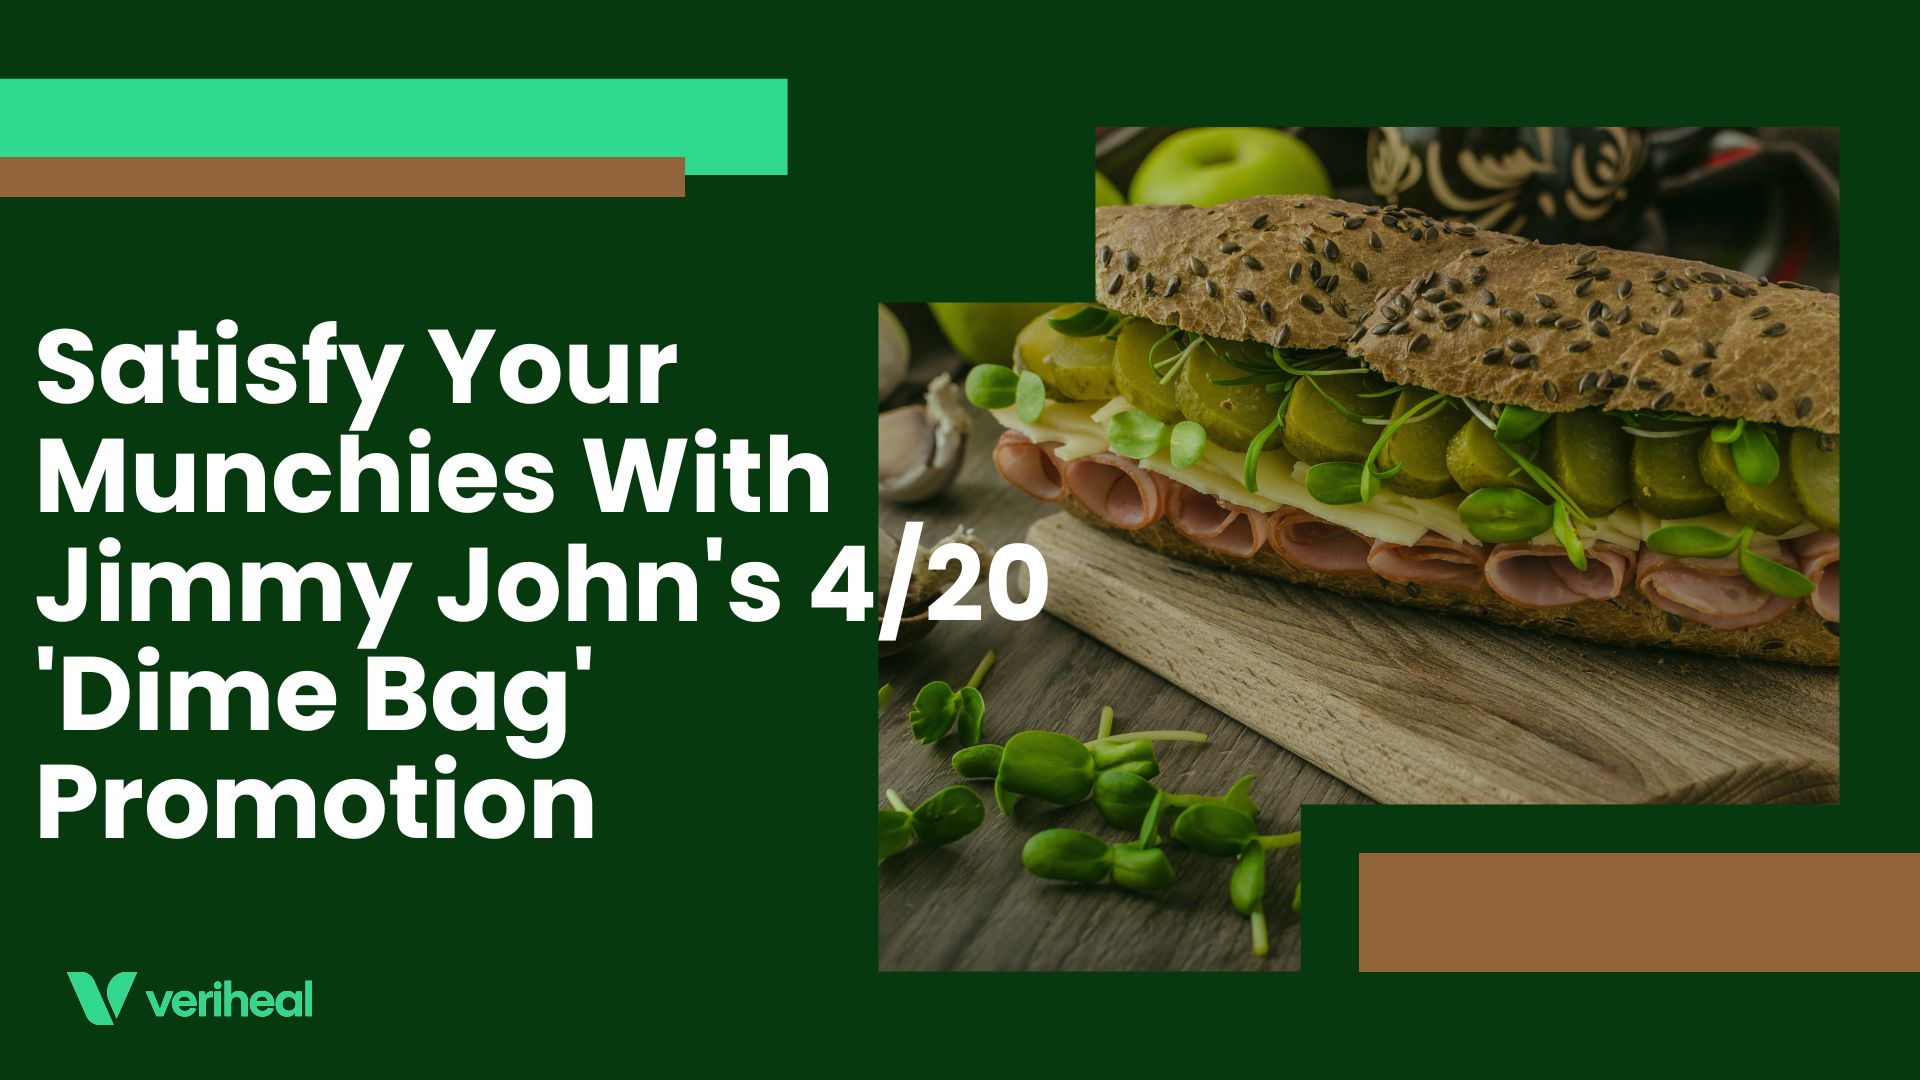 Satisfy Your Munchies With Jimmy John’s 4/20 ‘Dime Bag’ Promotion